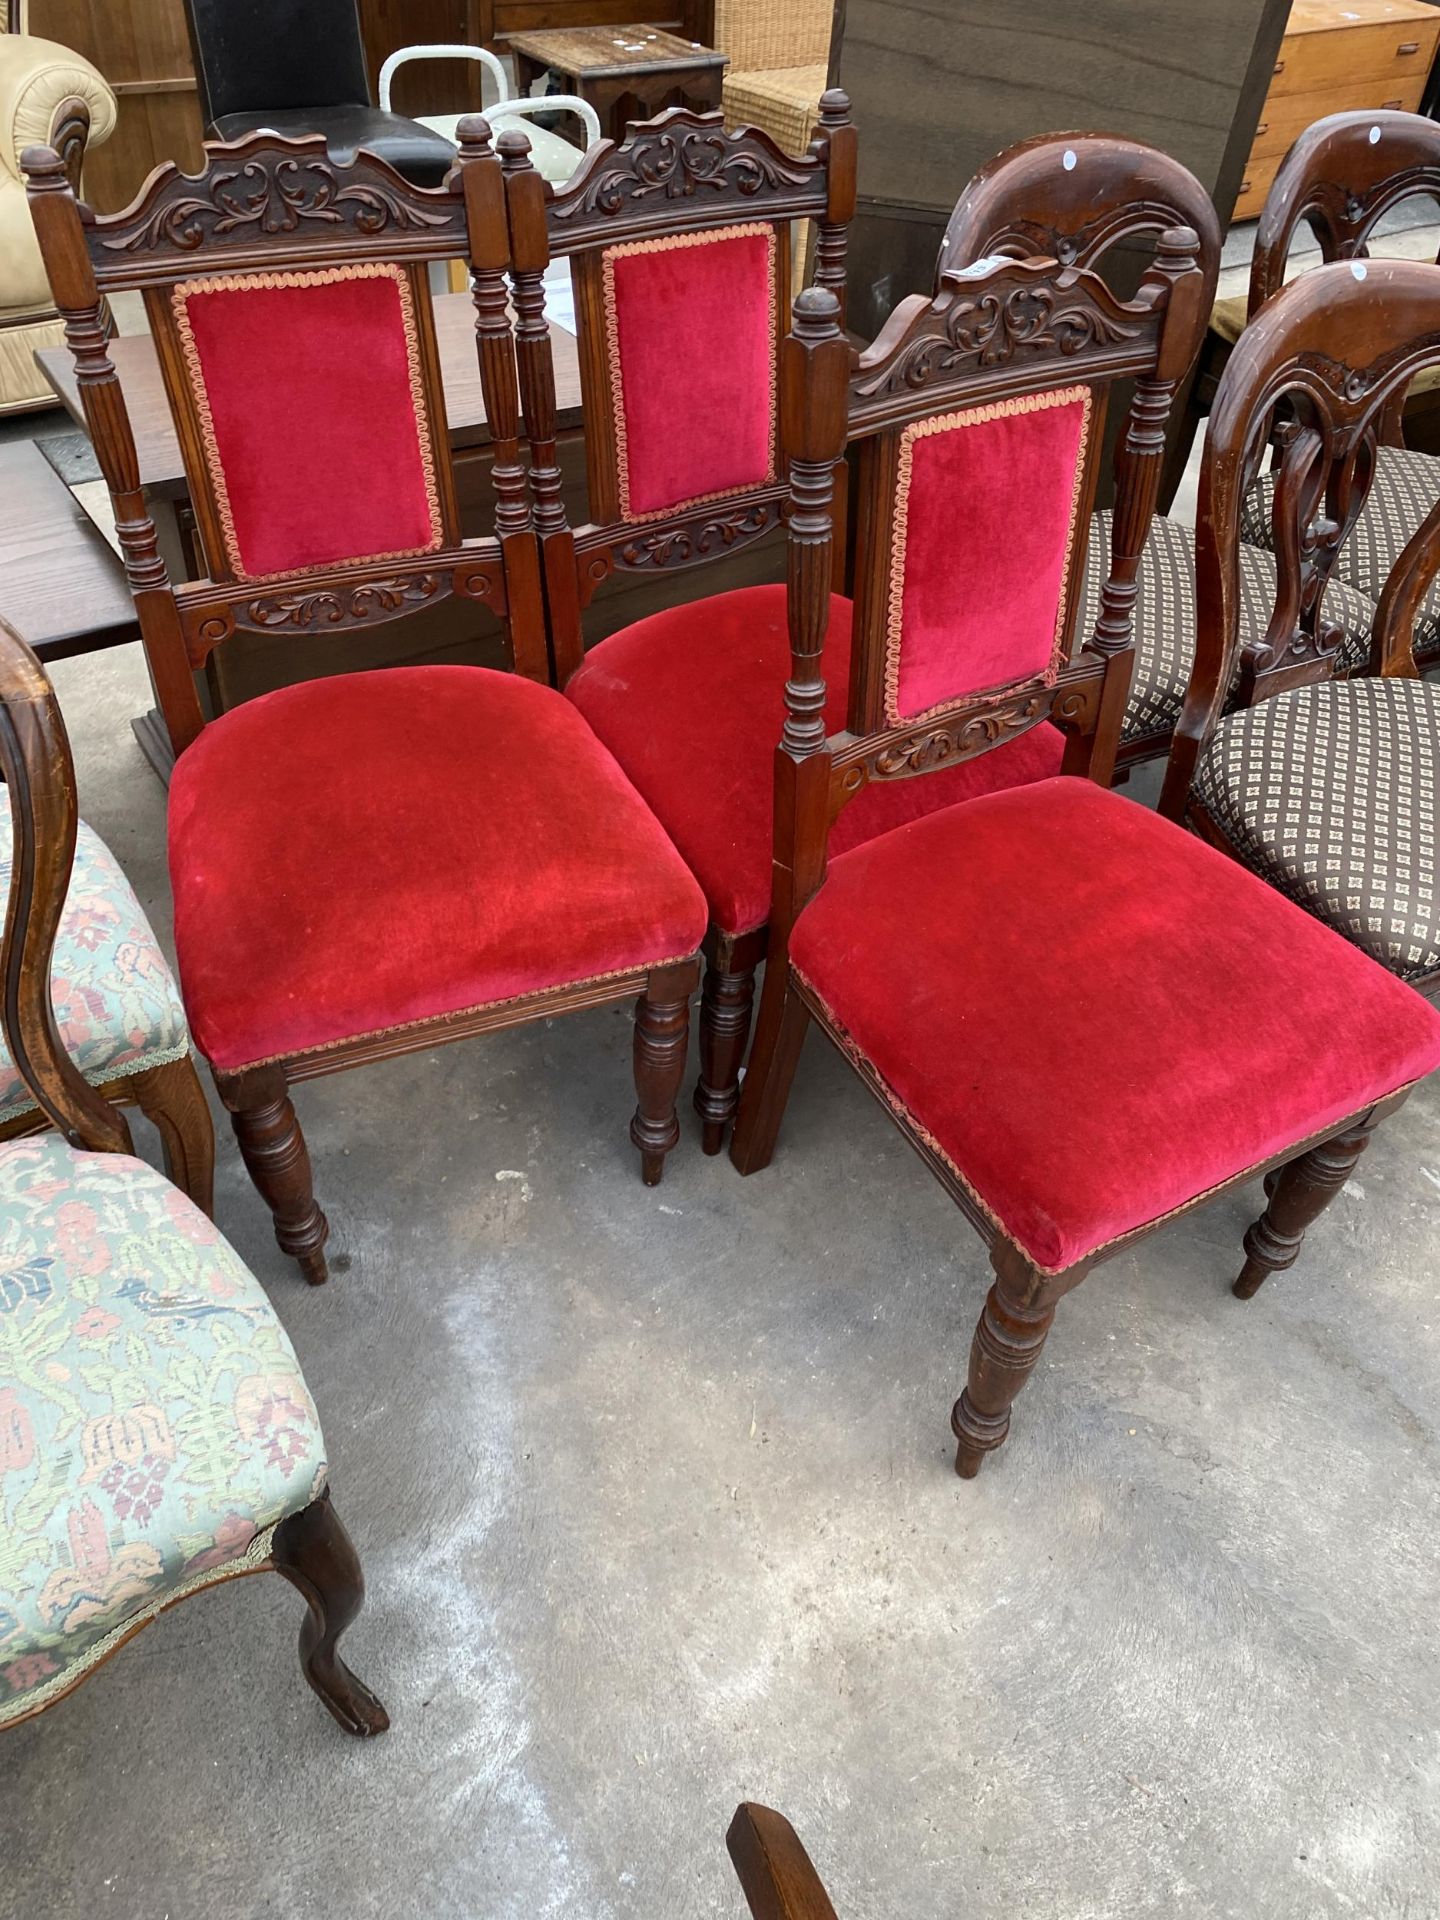 THREE VICTORIAN MAHOGANY DINING CHAIRS WITH CARVED BACK RAILS AND THREE BALLOON BACK CHAIRS - Image 3 of 4